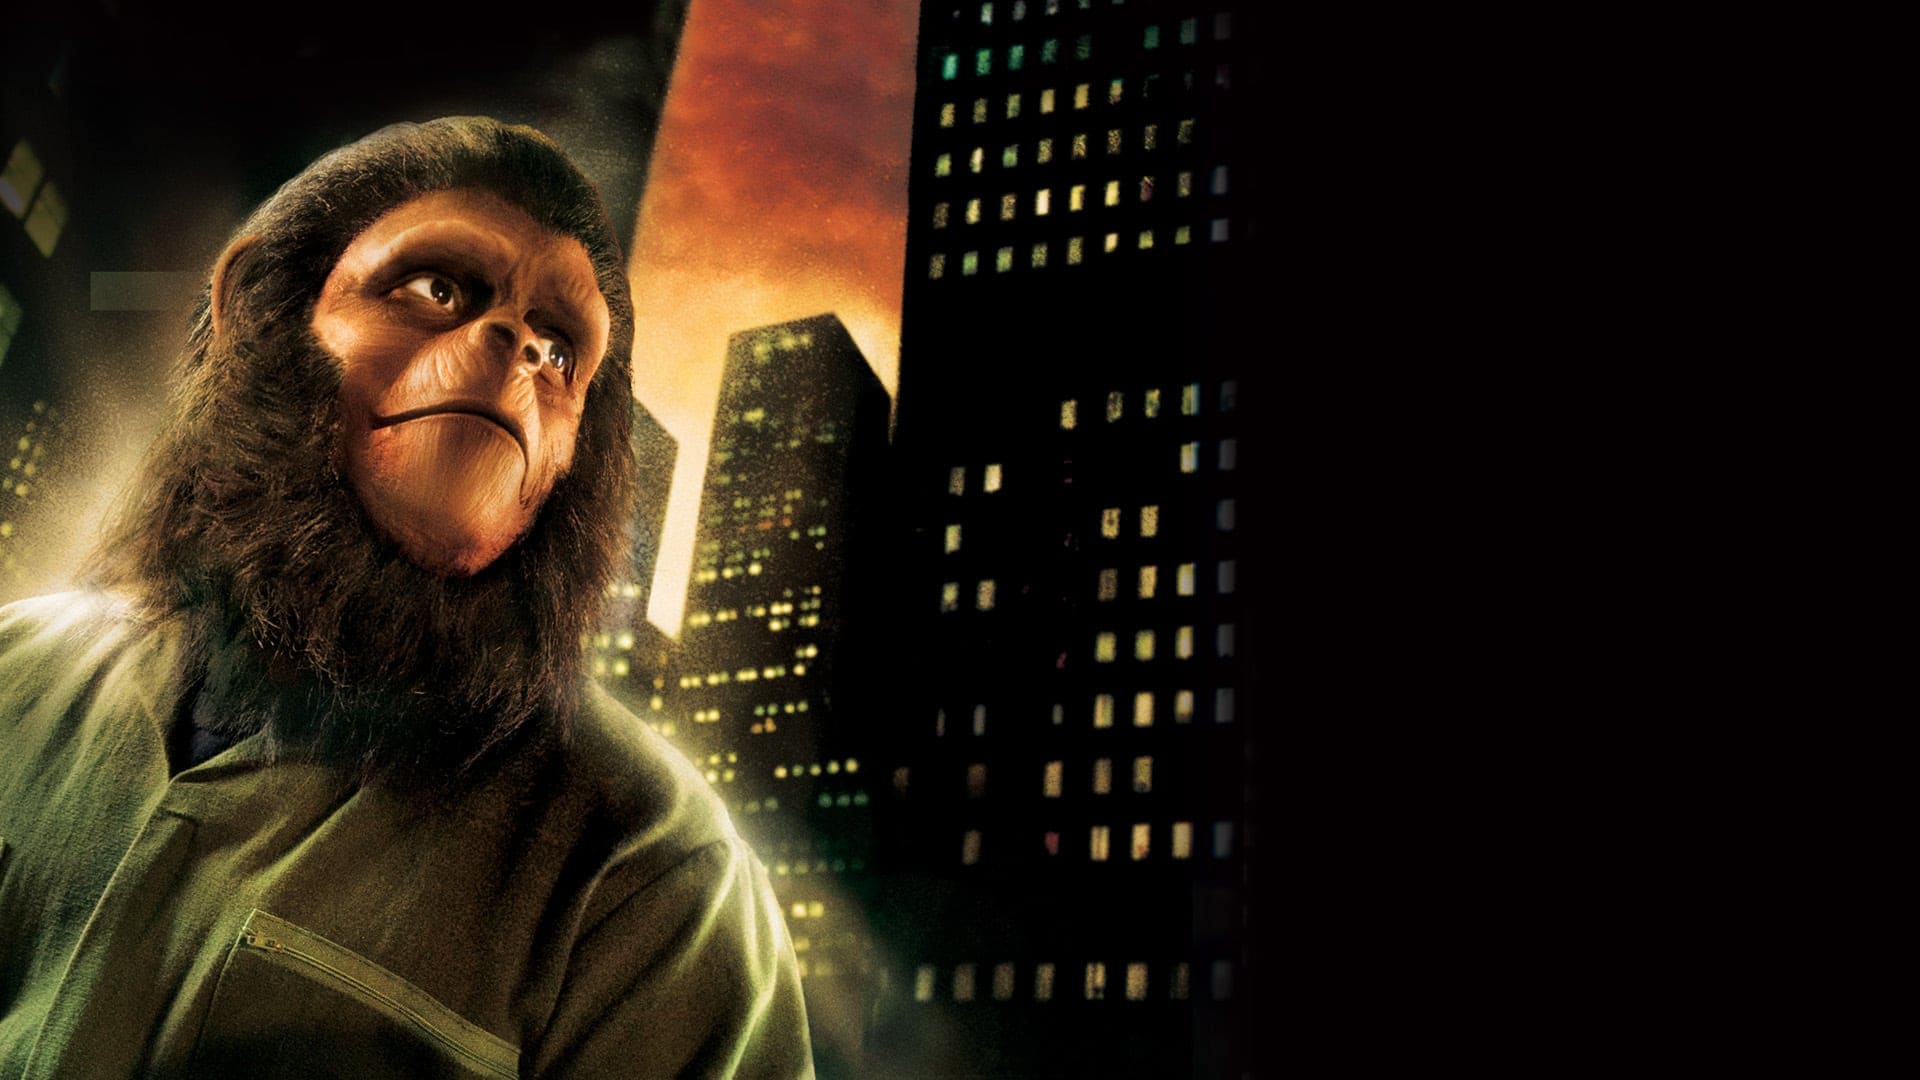 Watch Conquest of the Planet of the Apes Online | Stream Full Movies